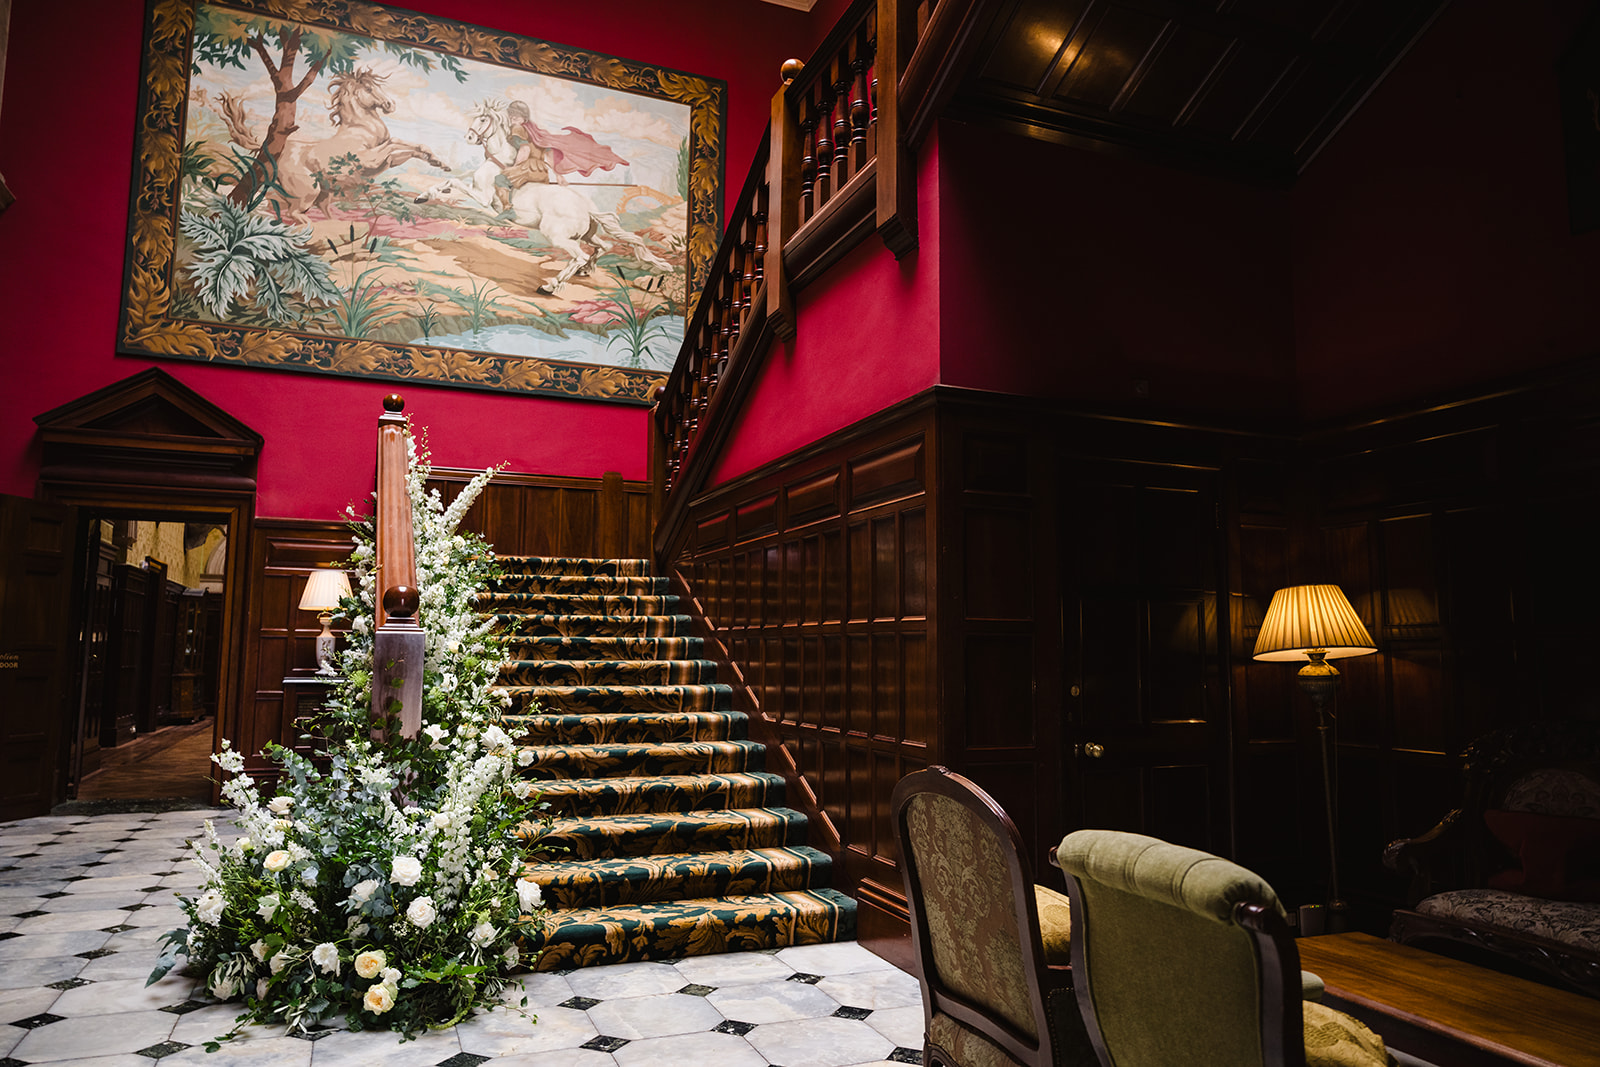 Staircase at stapleford park wedding addorned with flowers by Amanda Forman Photography